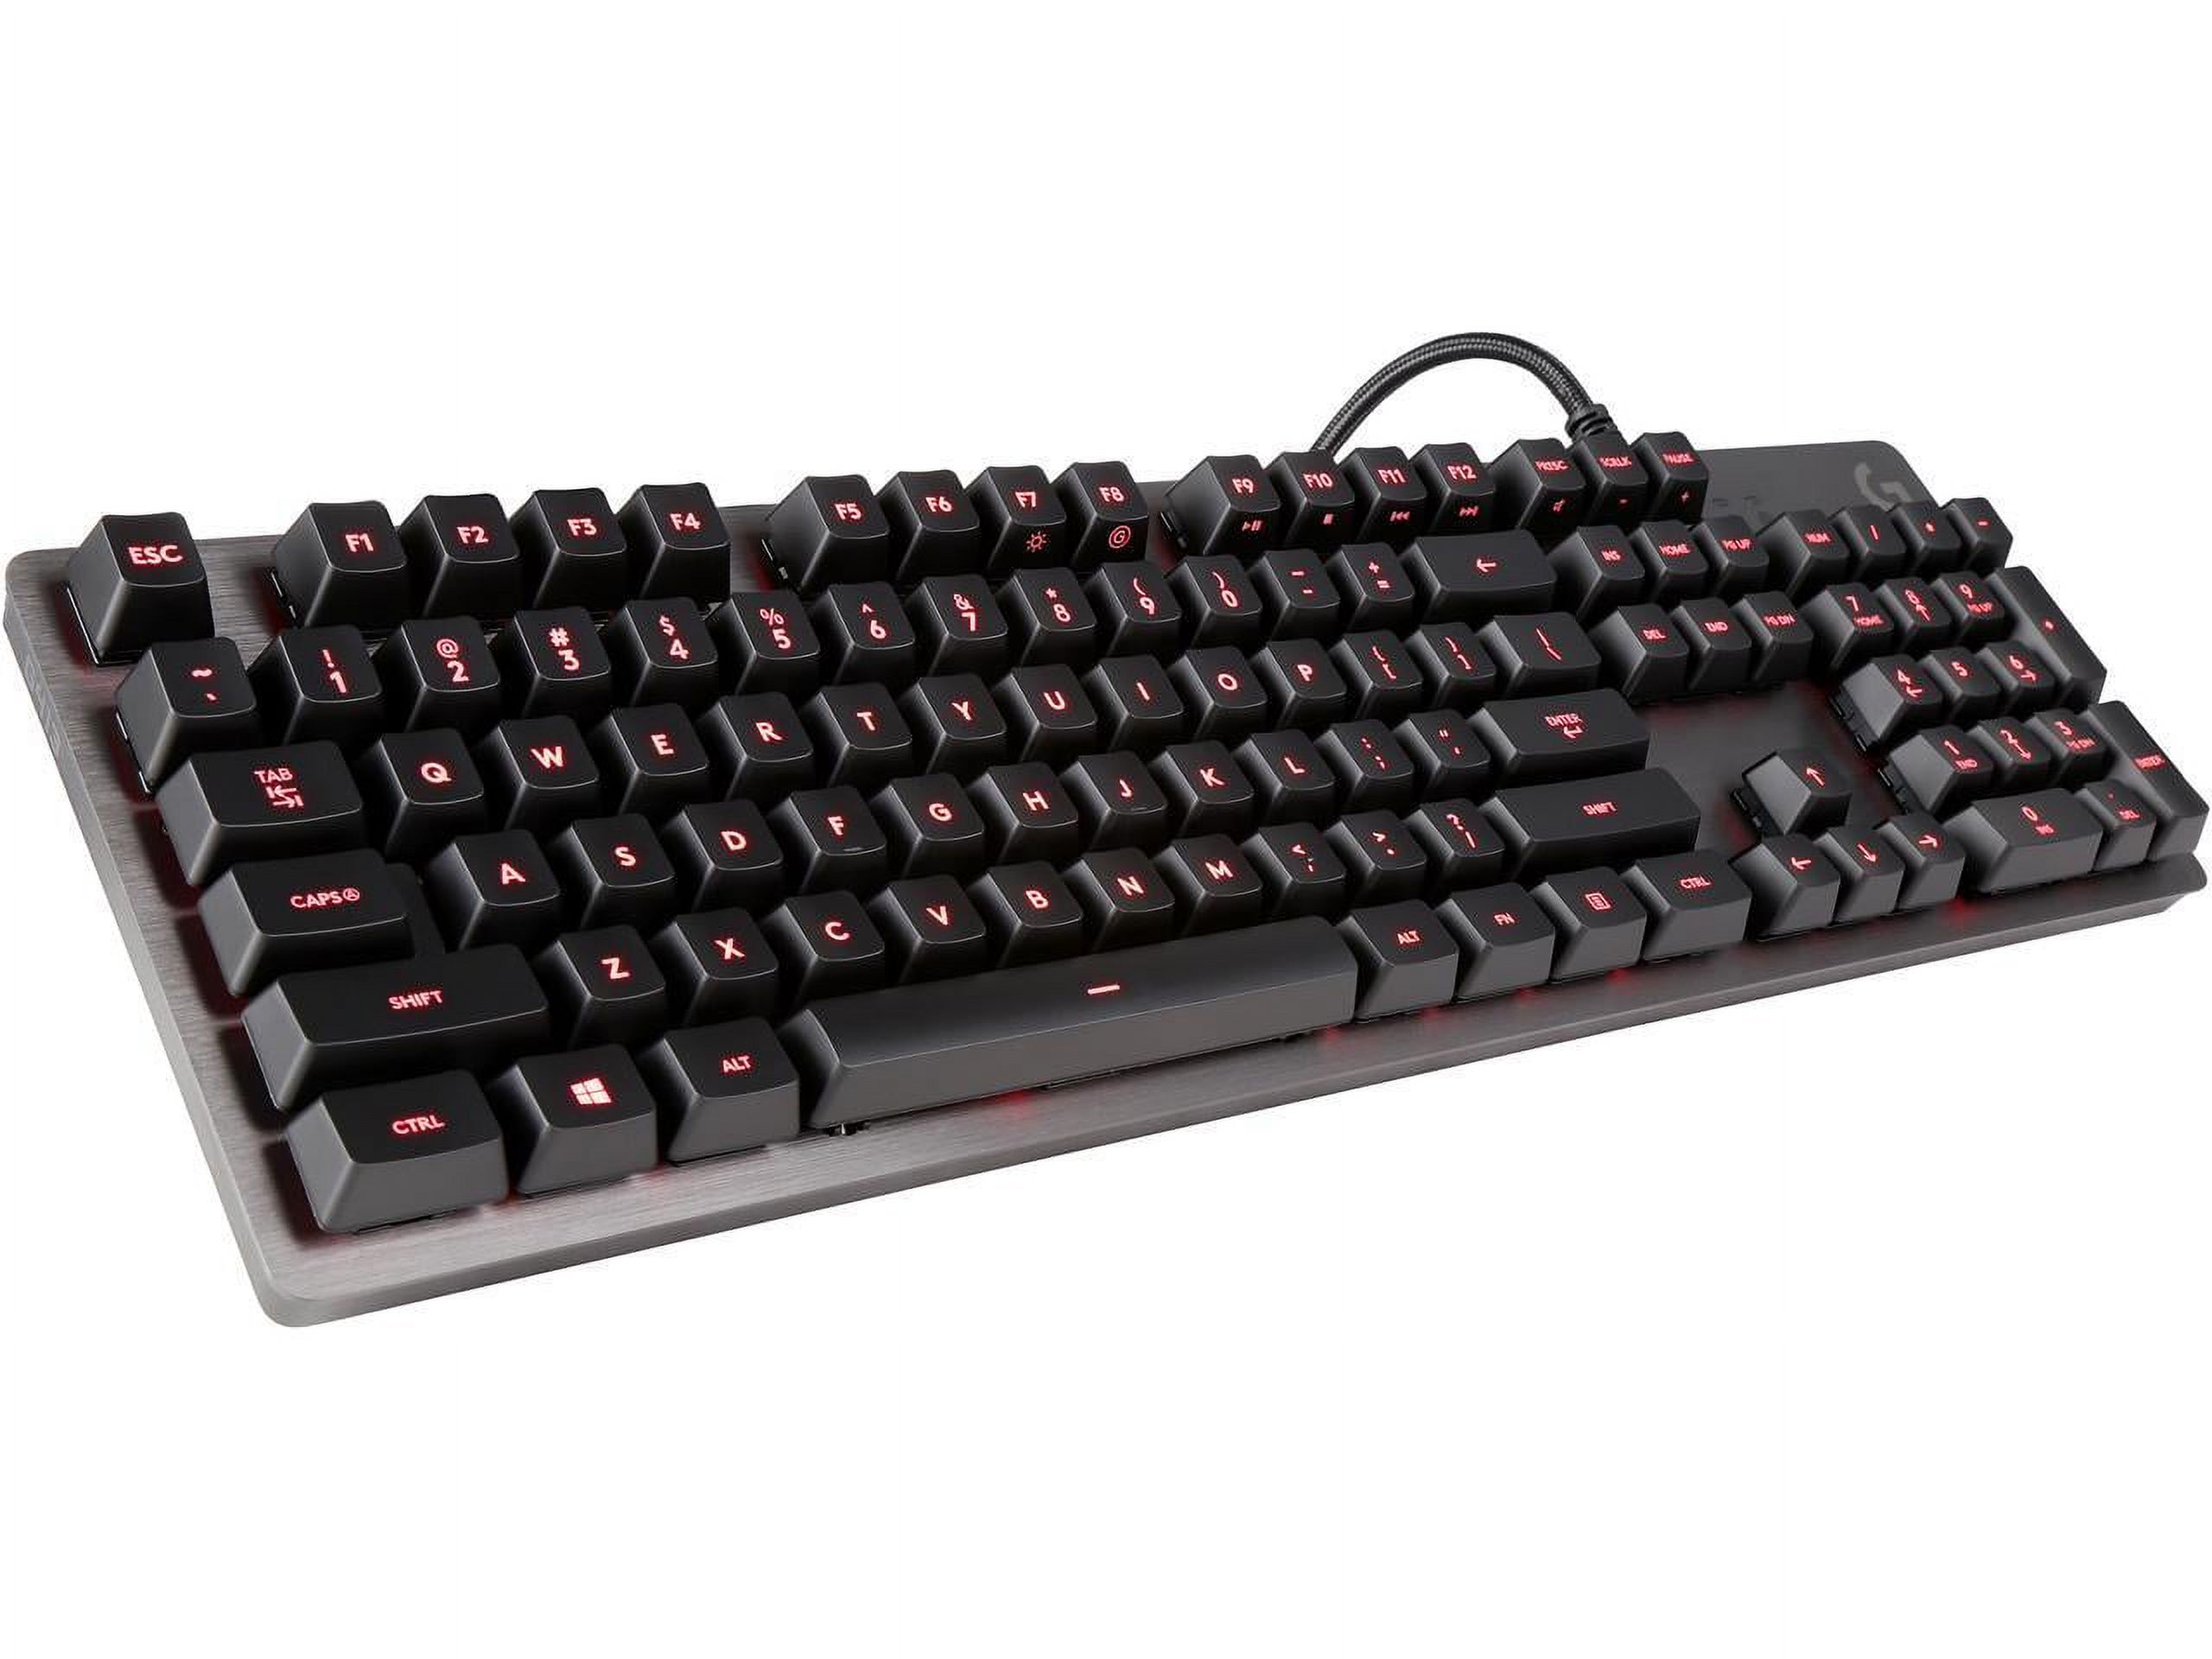 Logitech G413 Backlit Mechanical Gaming Keyboard with USB Passthrough, Carbon - image 1 of 4